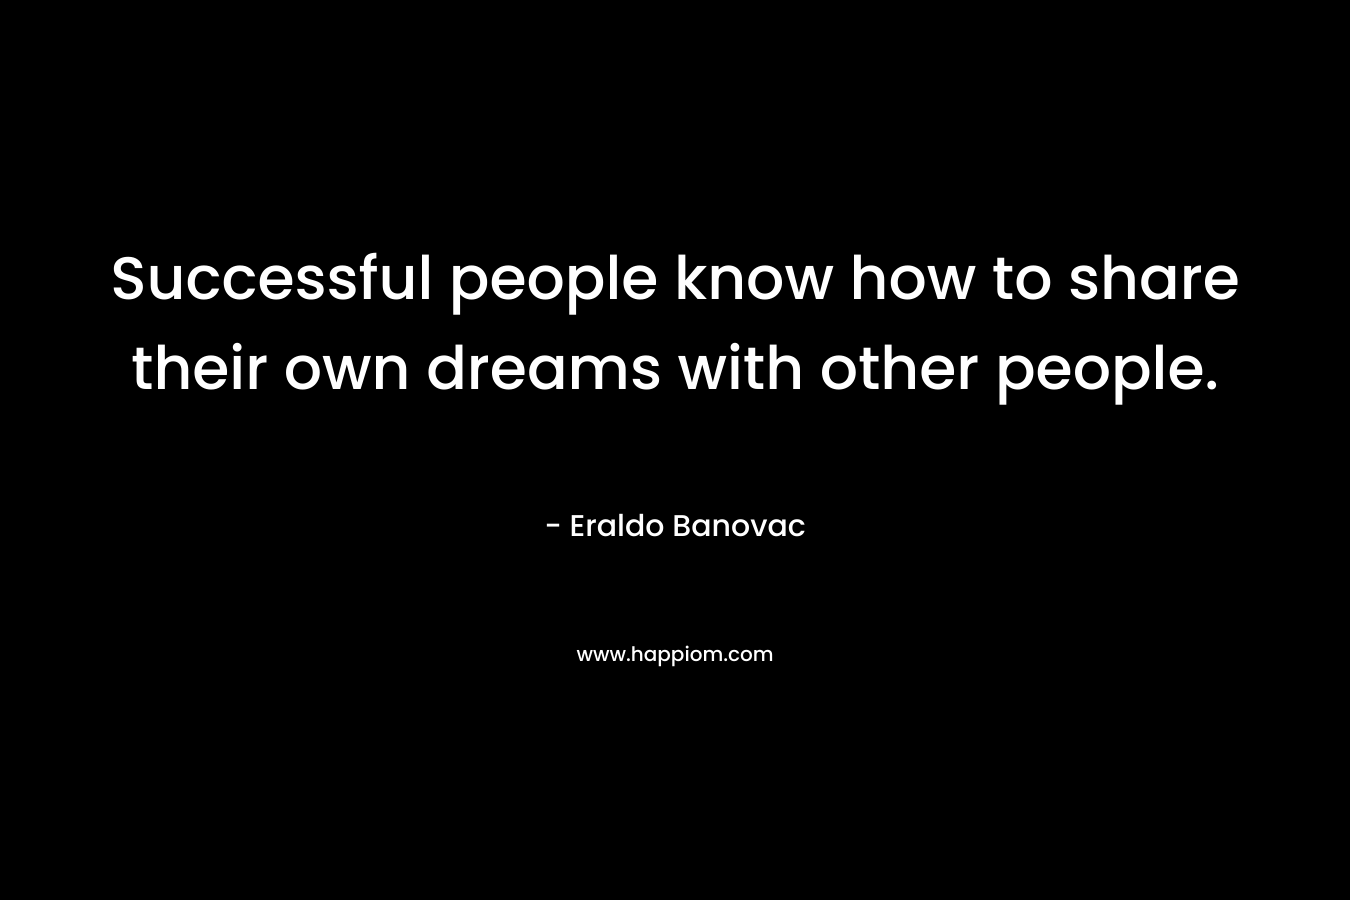 Successful people know how to share their own dreams with other people.